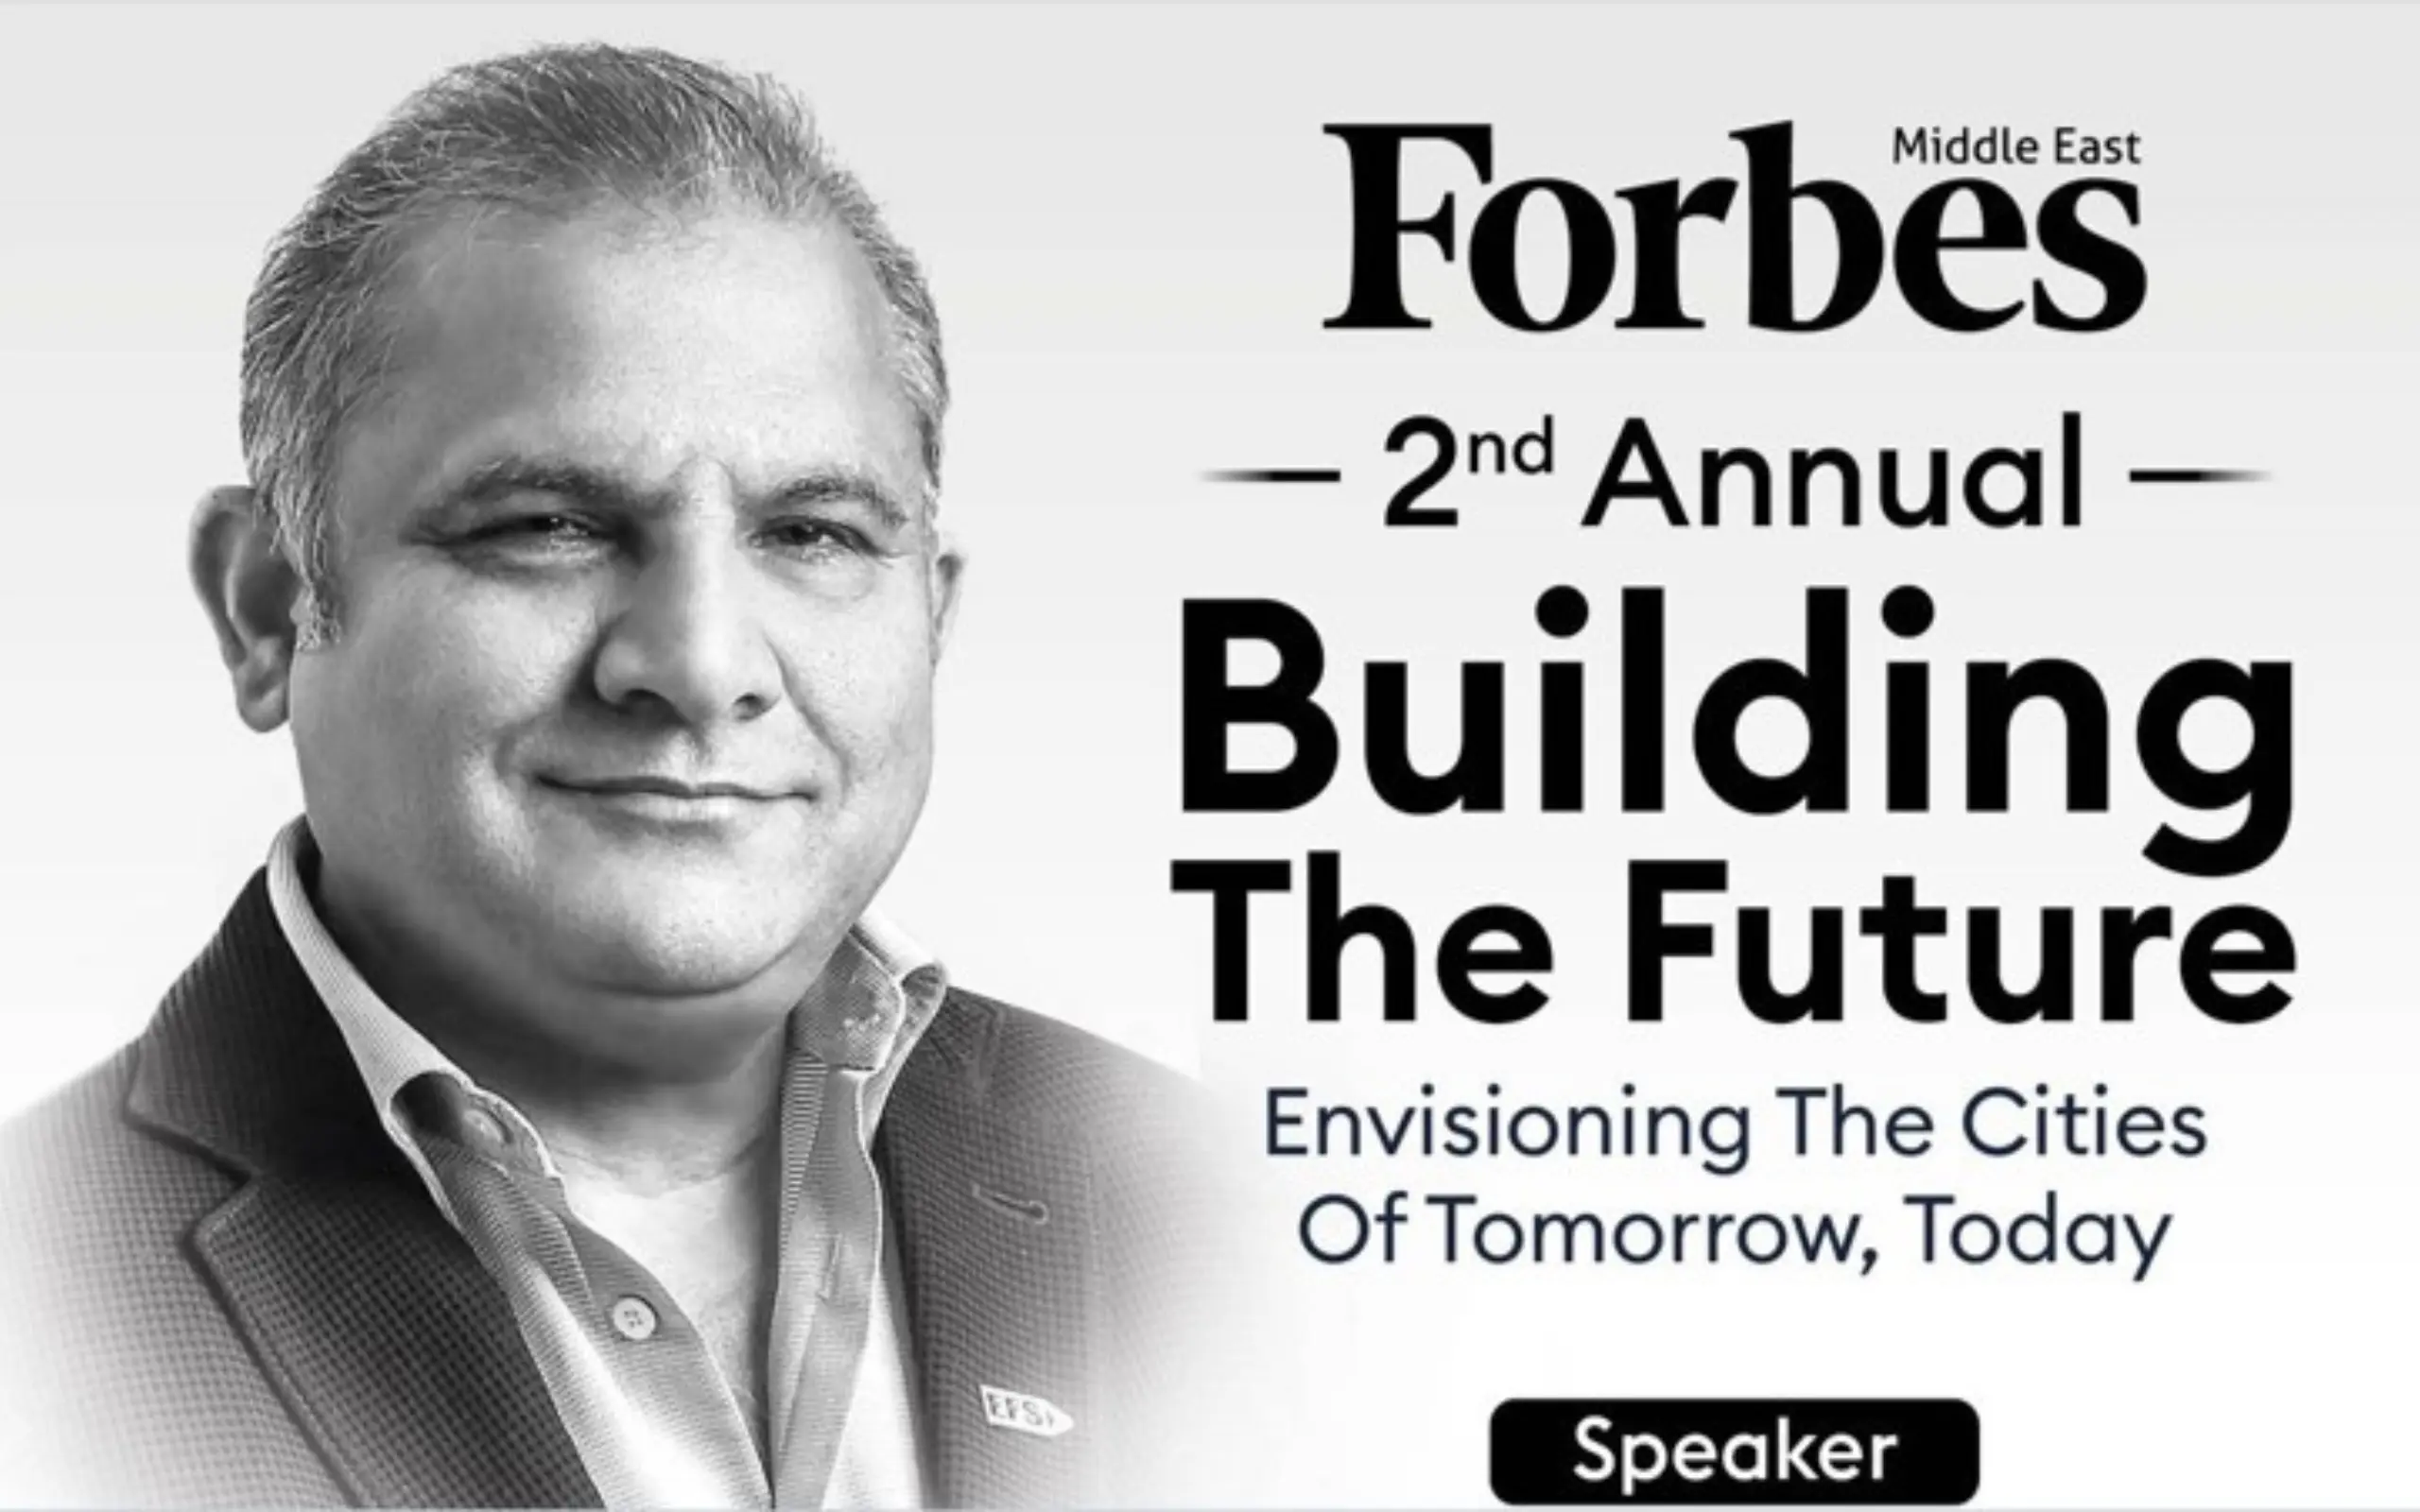 Tariq-Chauhan-for-Forbes-Middle-East-Building-the-Future-Summit